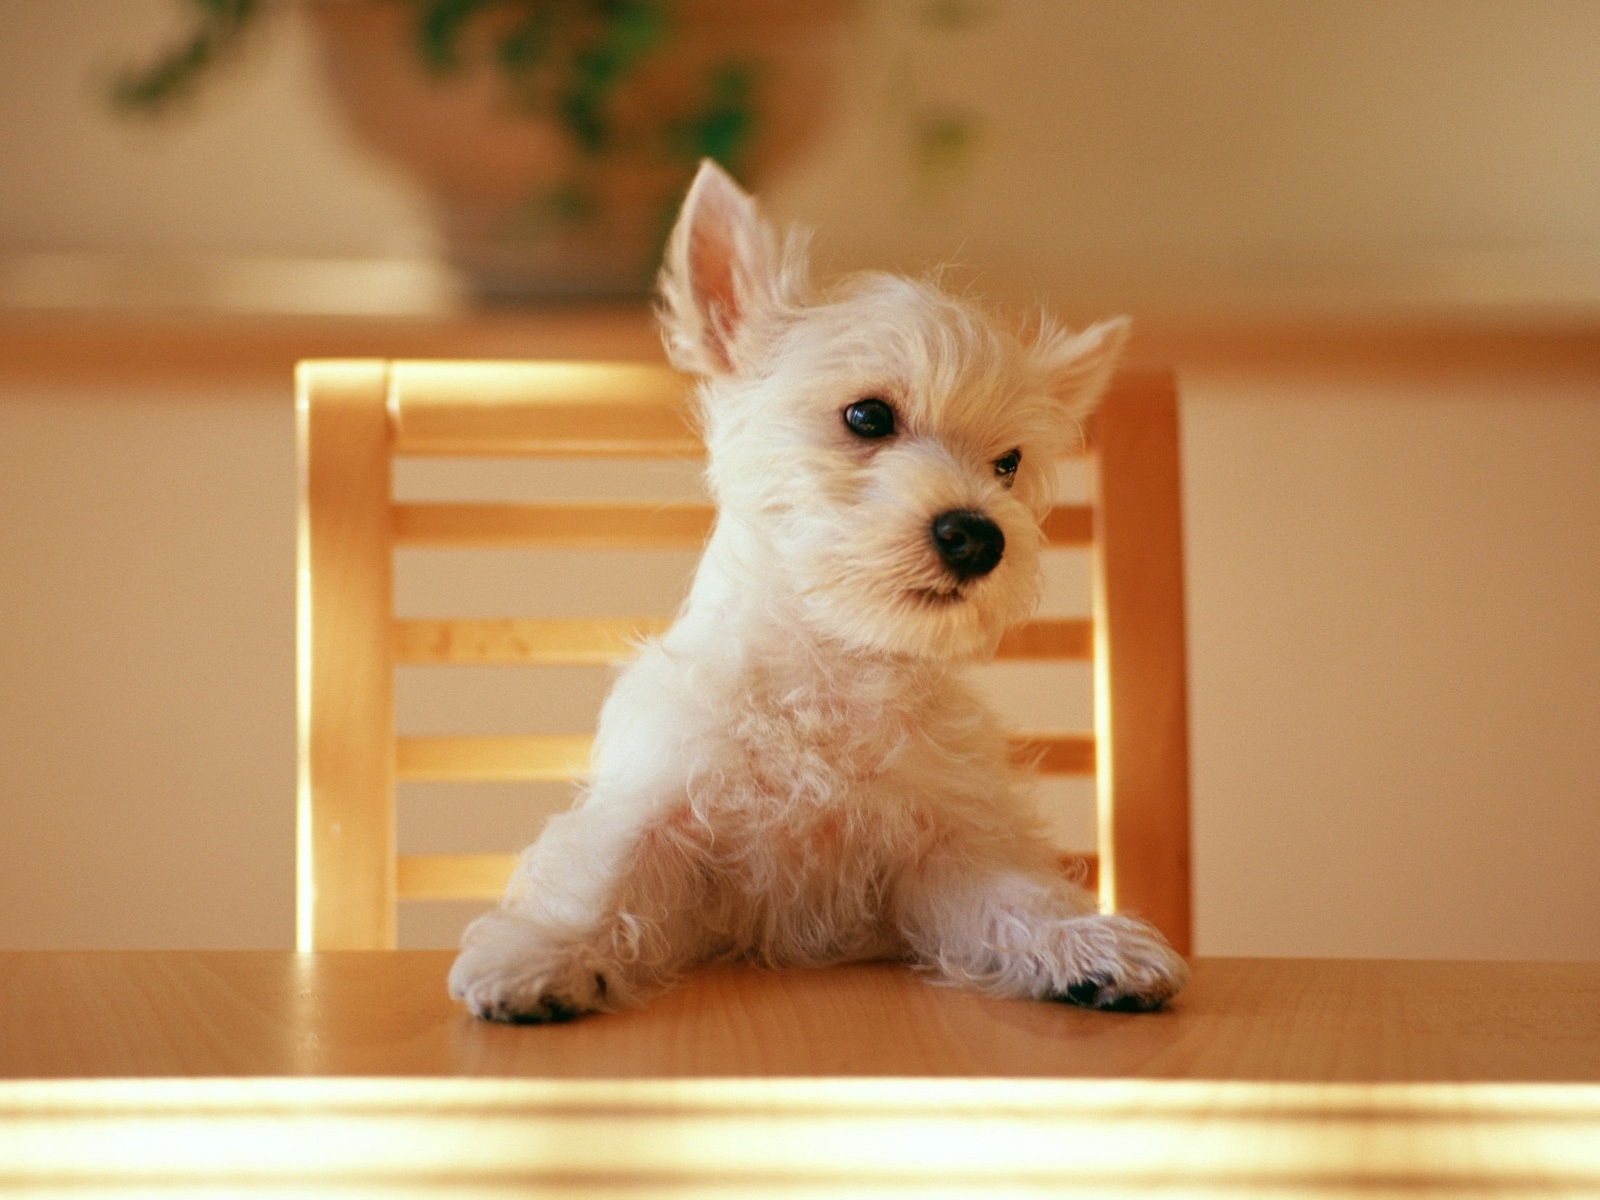 Dog at the table for 1600 x 1200 resolution